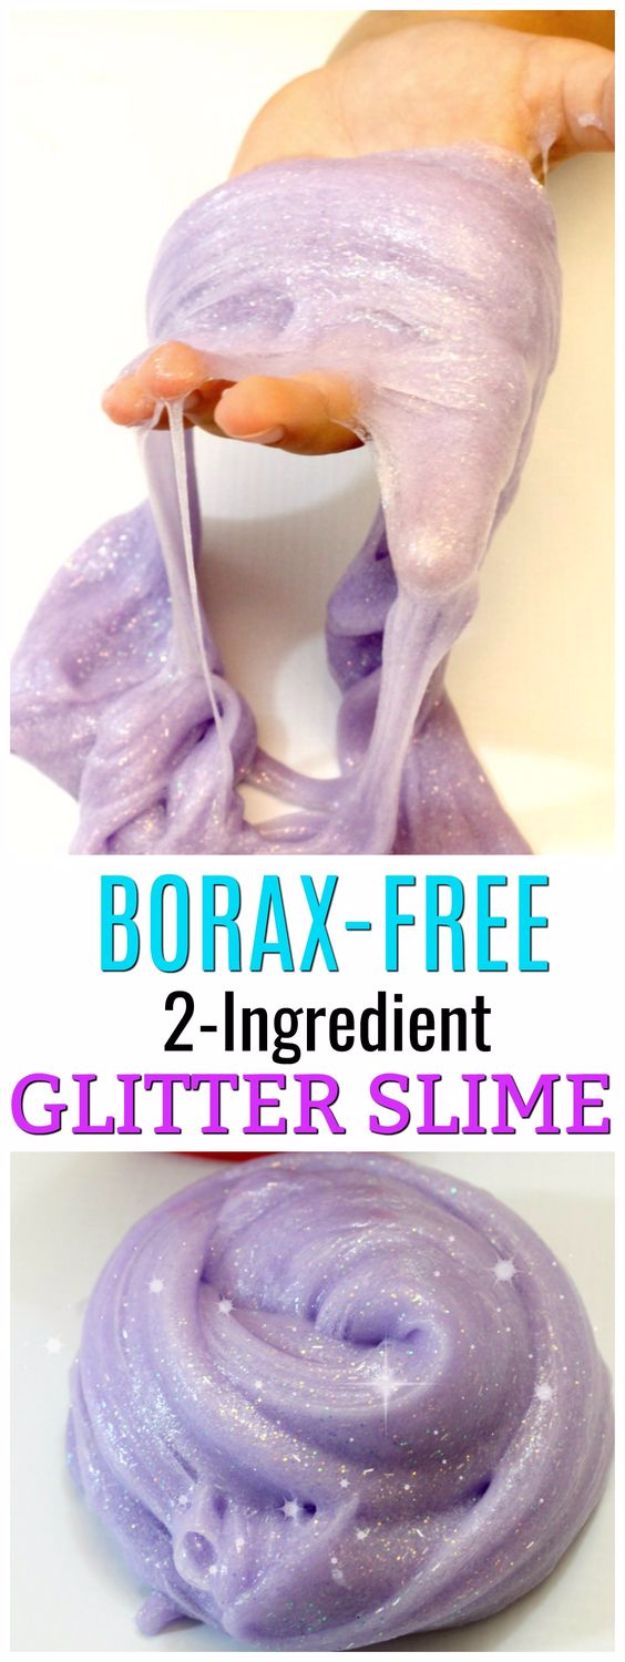 Best DIY Slime Recipes - Easy Glitter Slime With No Borax - Cool and Easy Slime Recipe and Tutorials - Ideas Without Glue, Without Borax, For Kids, With Liquid Starch, Cornstarch and Laundry Detergent - How to Make Slime at Home - Fun Crafts and DIY Projects for Teens, Kids, Teenagers and Teens - Galaxy and Glitter Slime, Edible Slime, Rainbow Colored Slime, Shaving Cream recipes and more fun crafts and slimes #slimerecipes #slime #diyslime #teencrafts